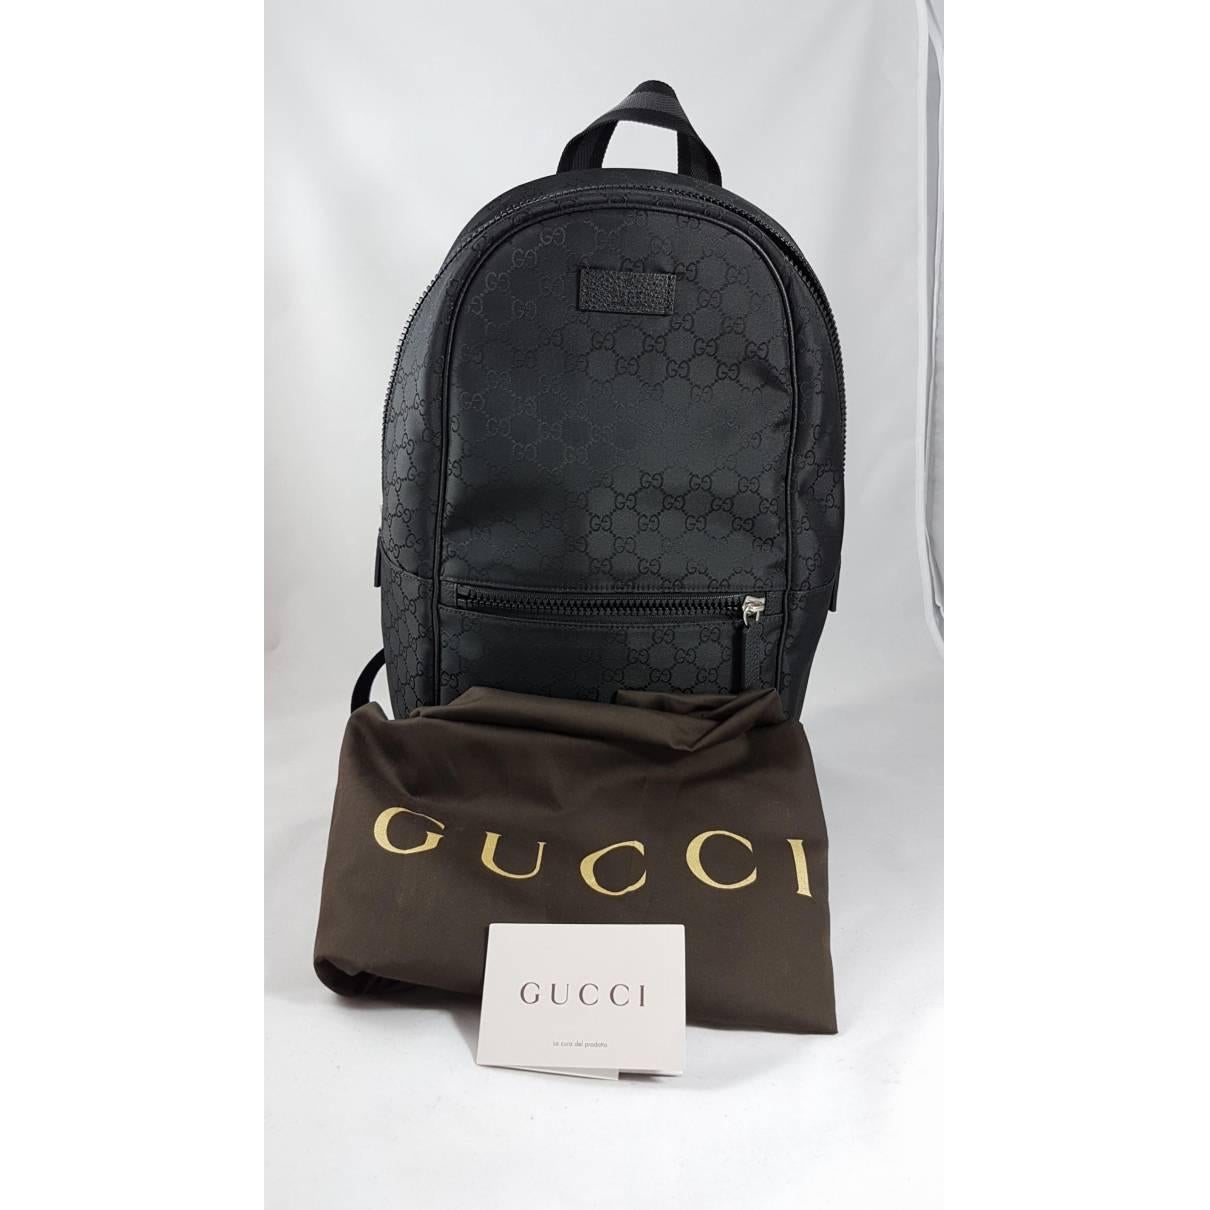 Gucci Black GG Guccissima Backpack Bag For Sale 4